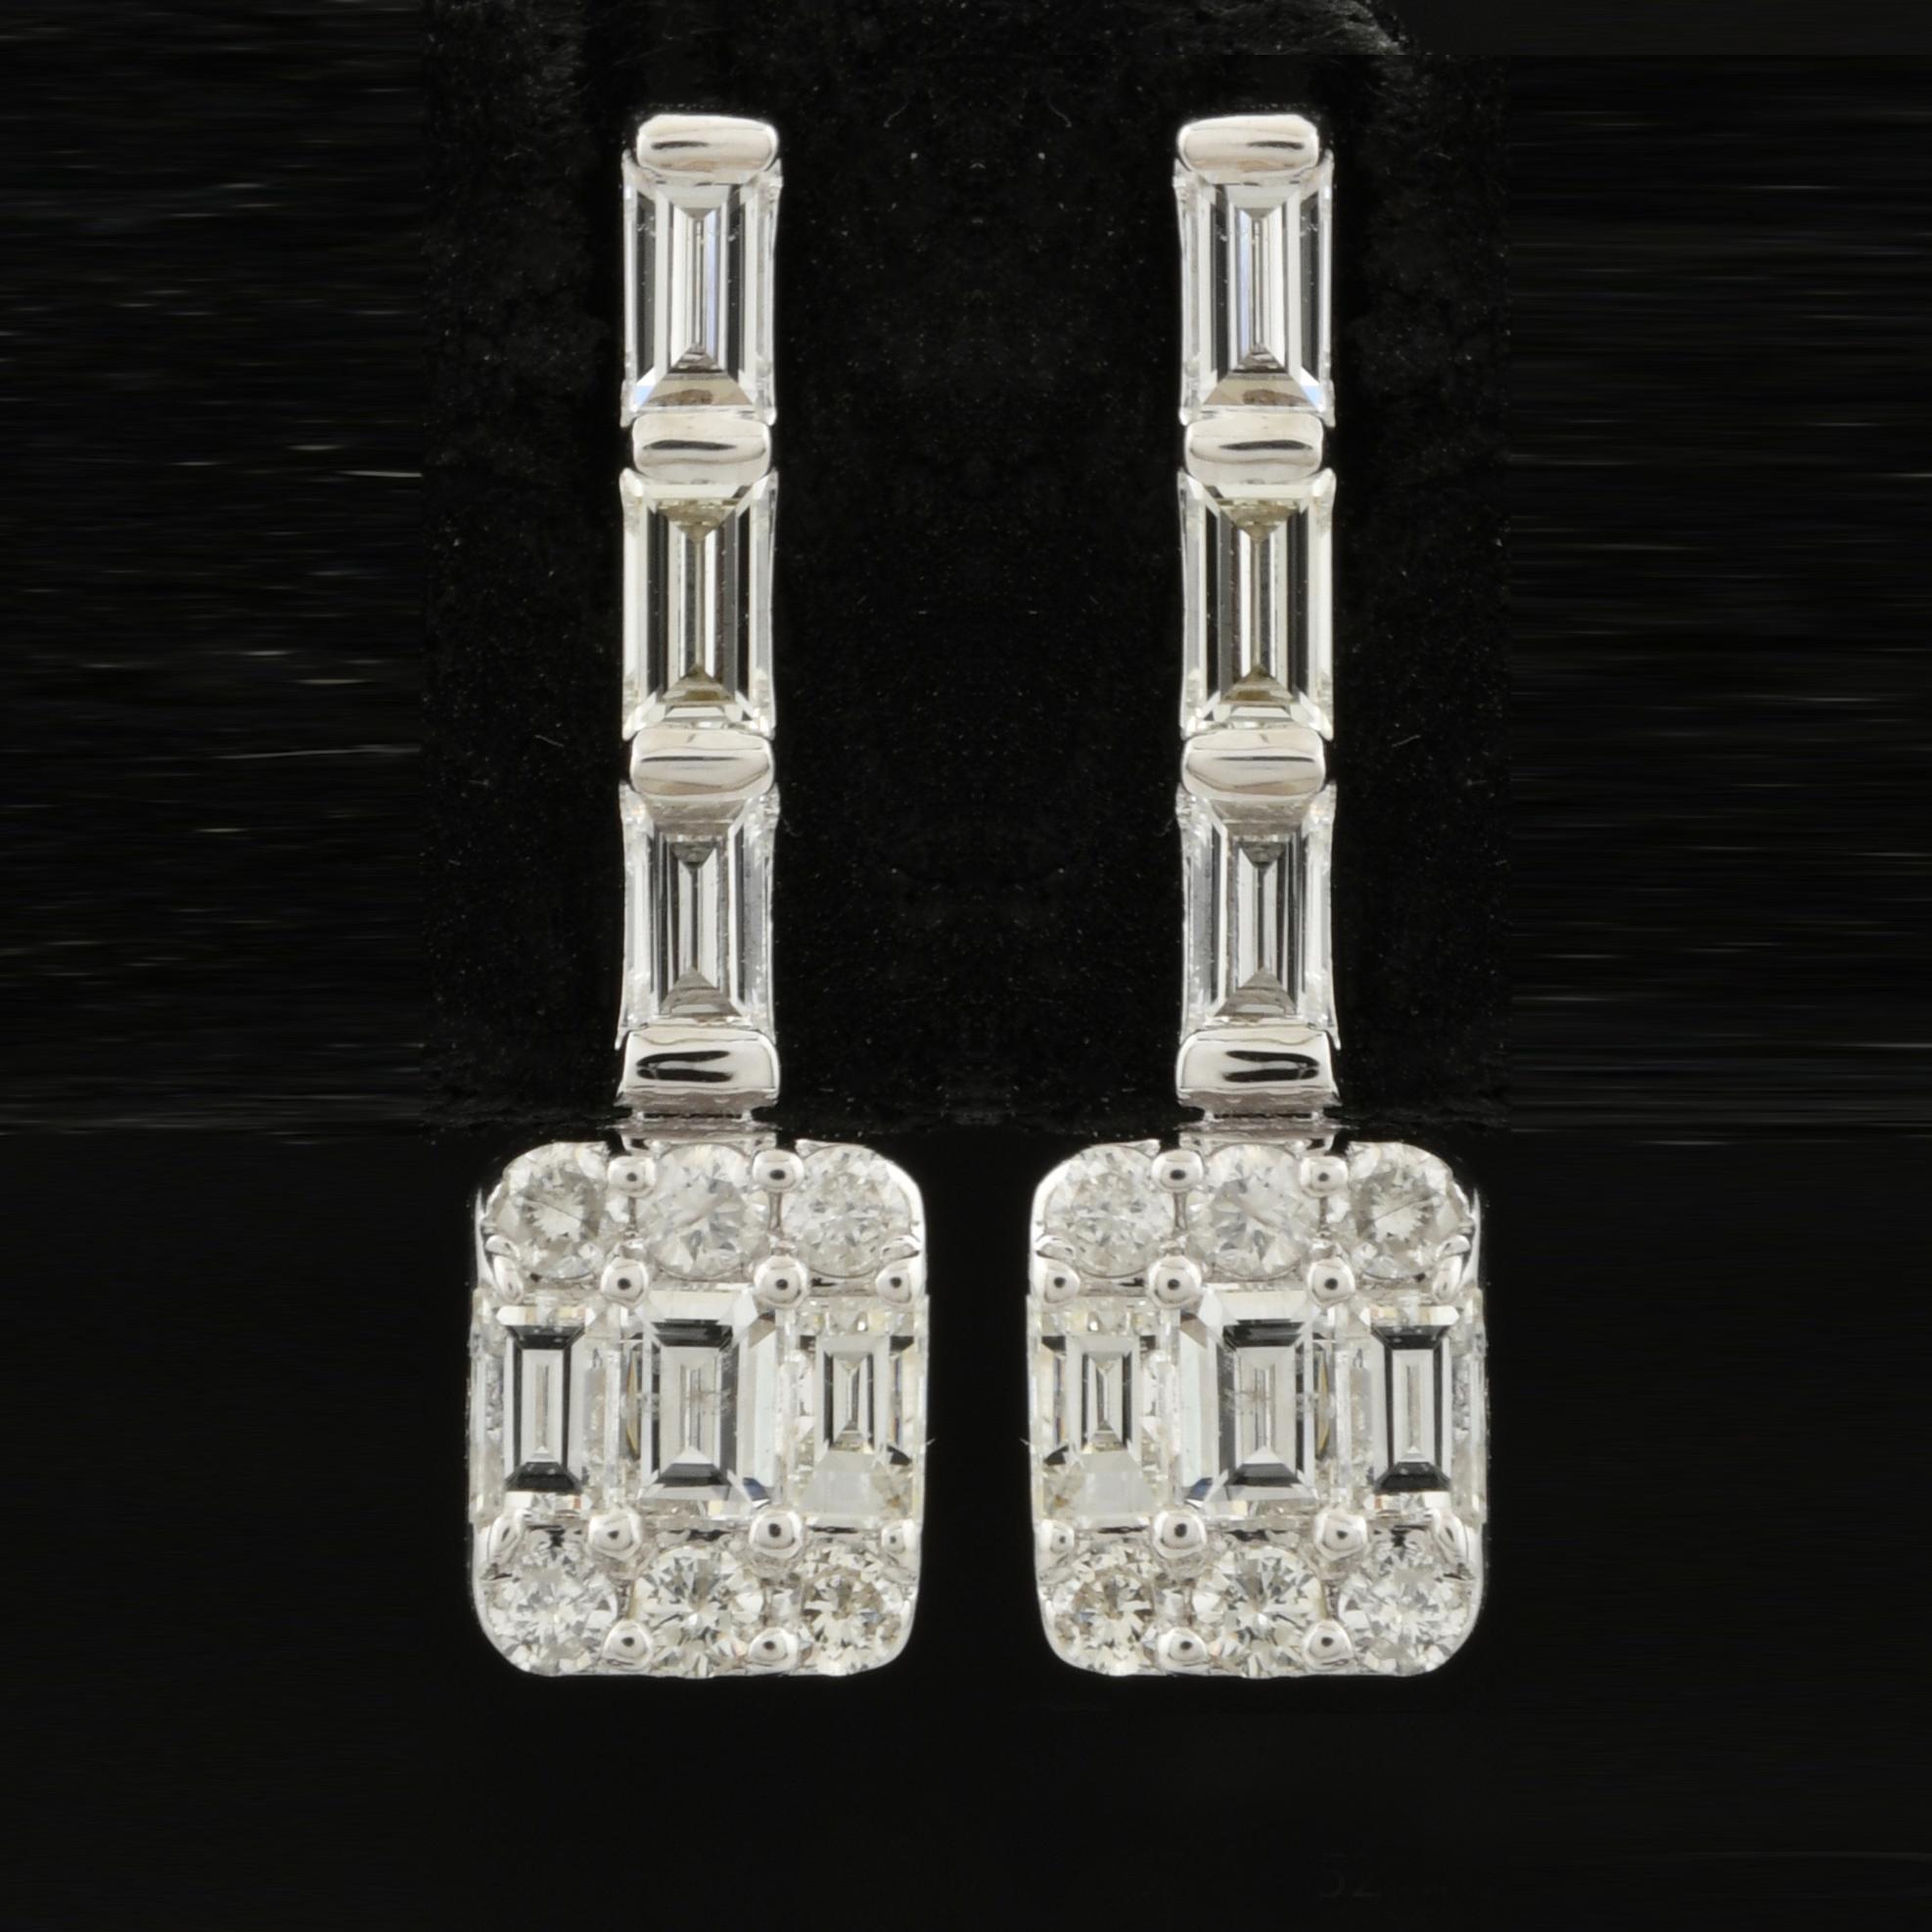 Modern 0.72 Carat SI Clarity HI Color Baguette Diamond Earrings 14k White Gold Jewelry For Sale